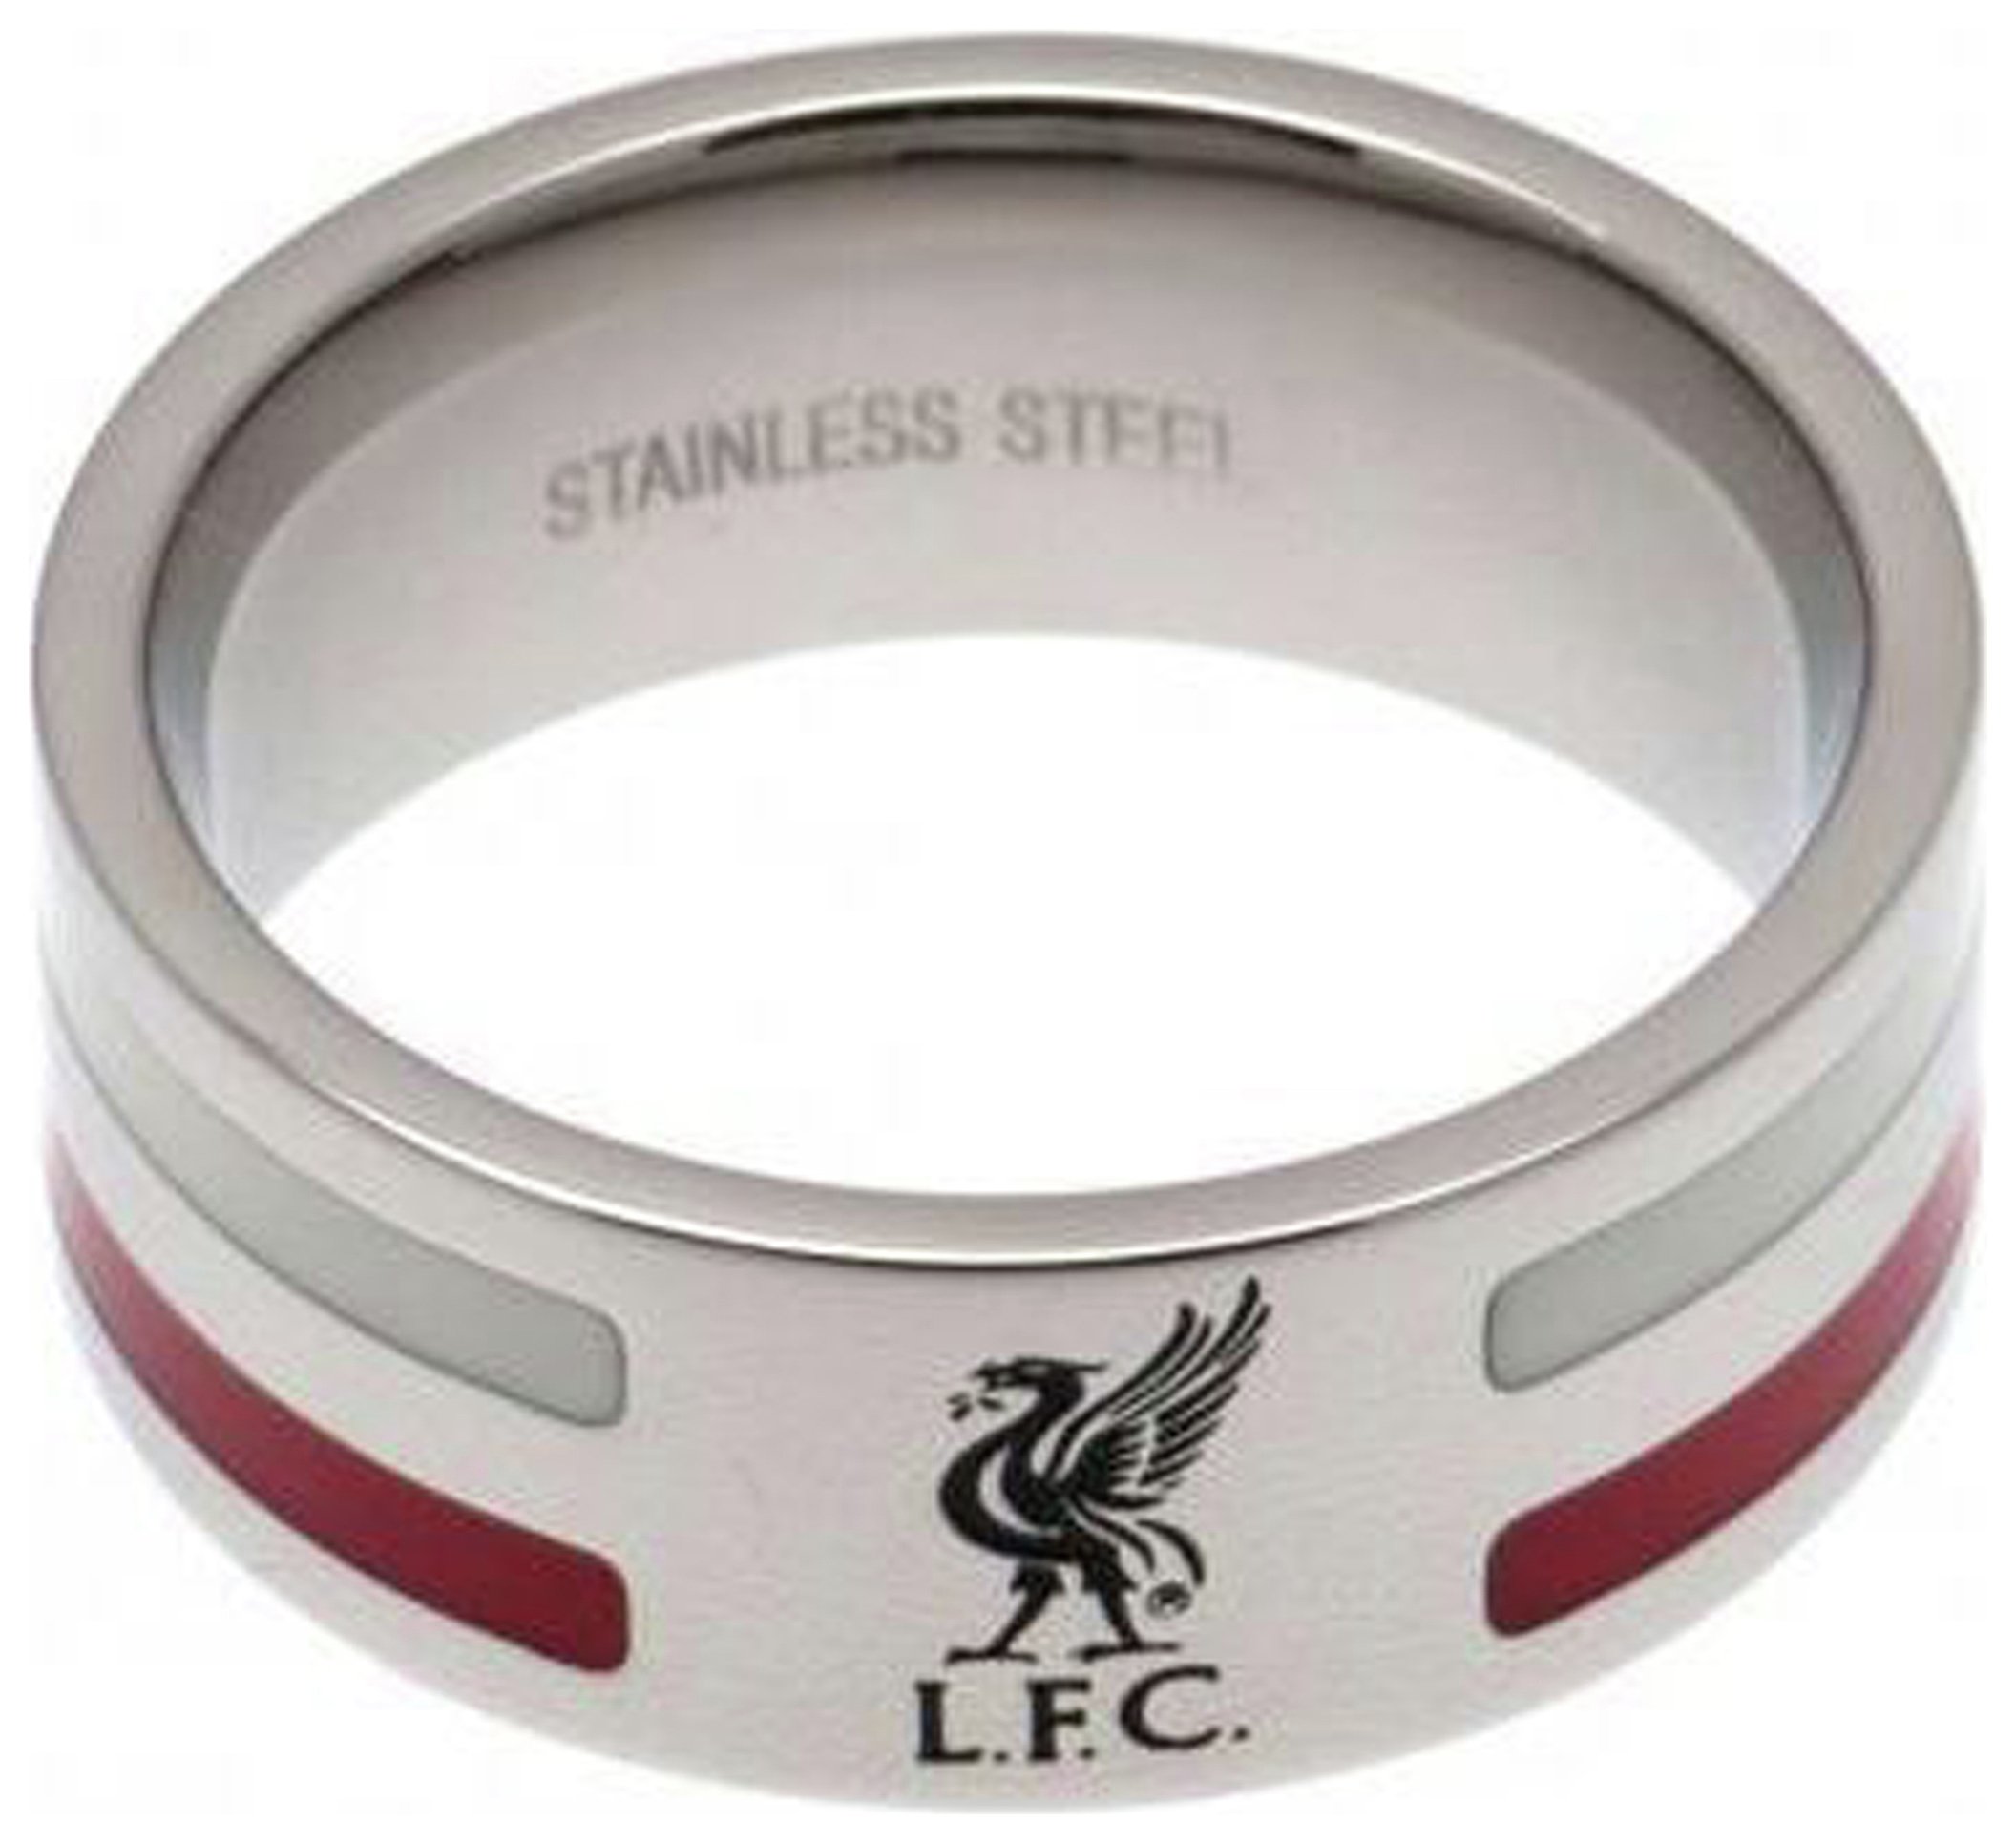 Stainless Steel Liverpool Striped Ring - Size R.